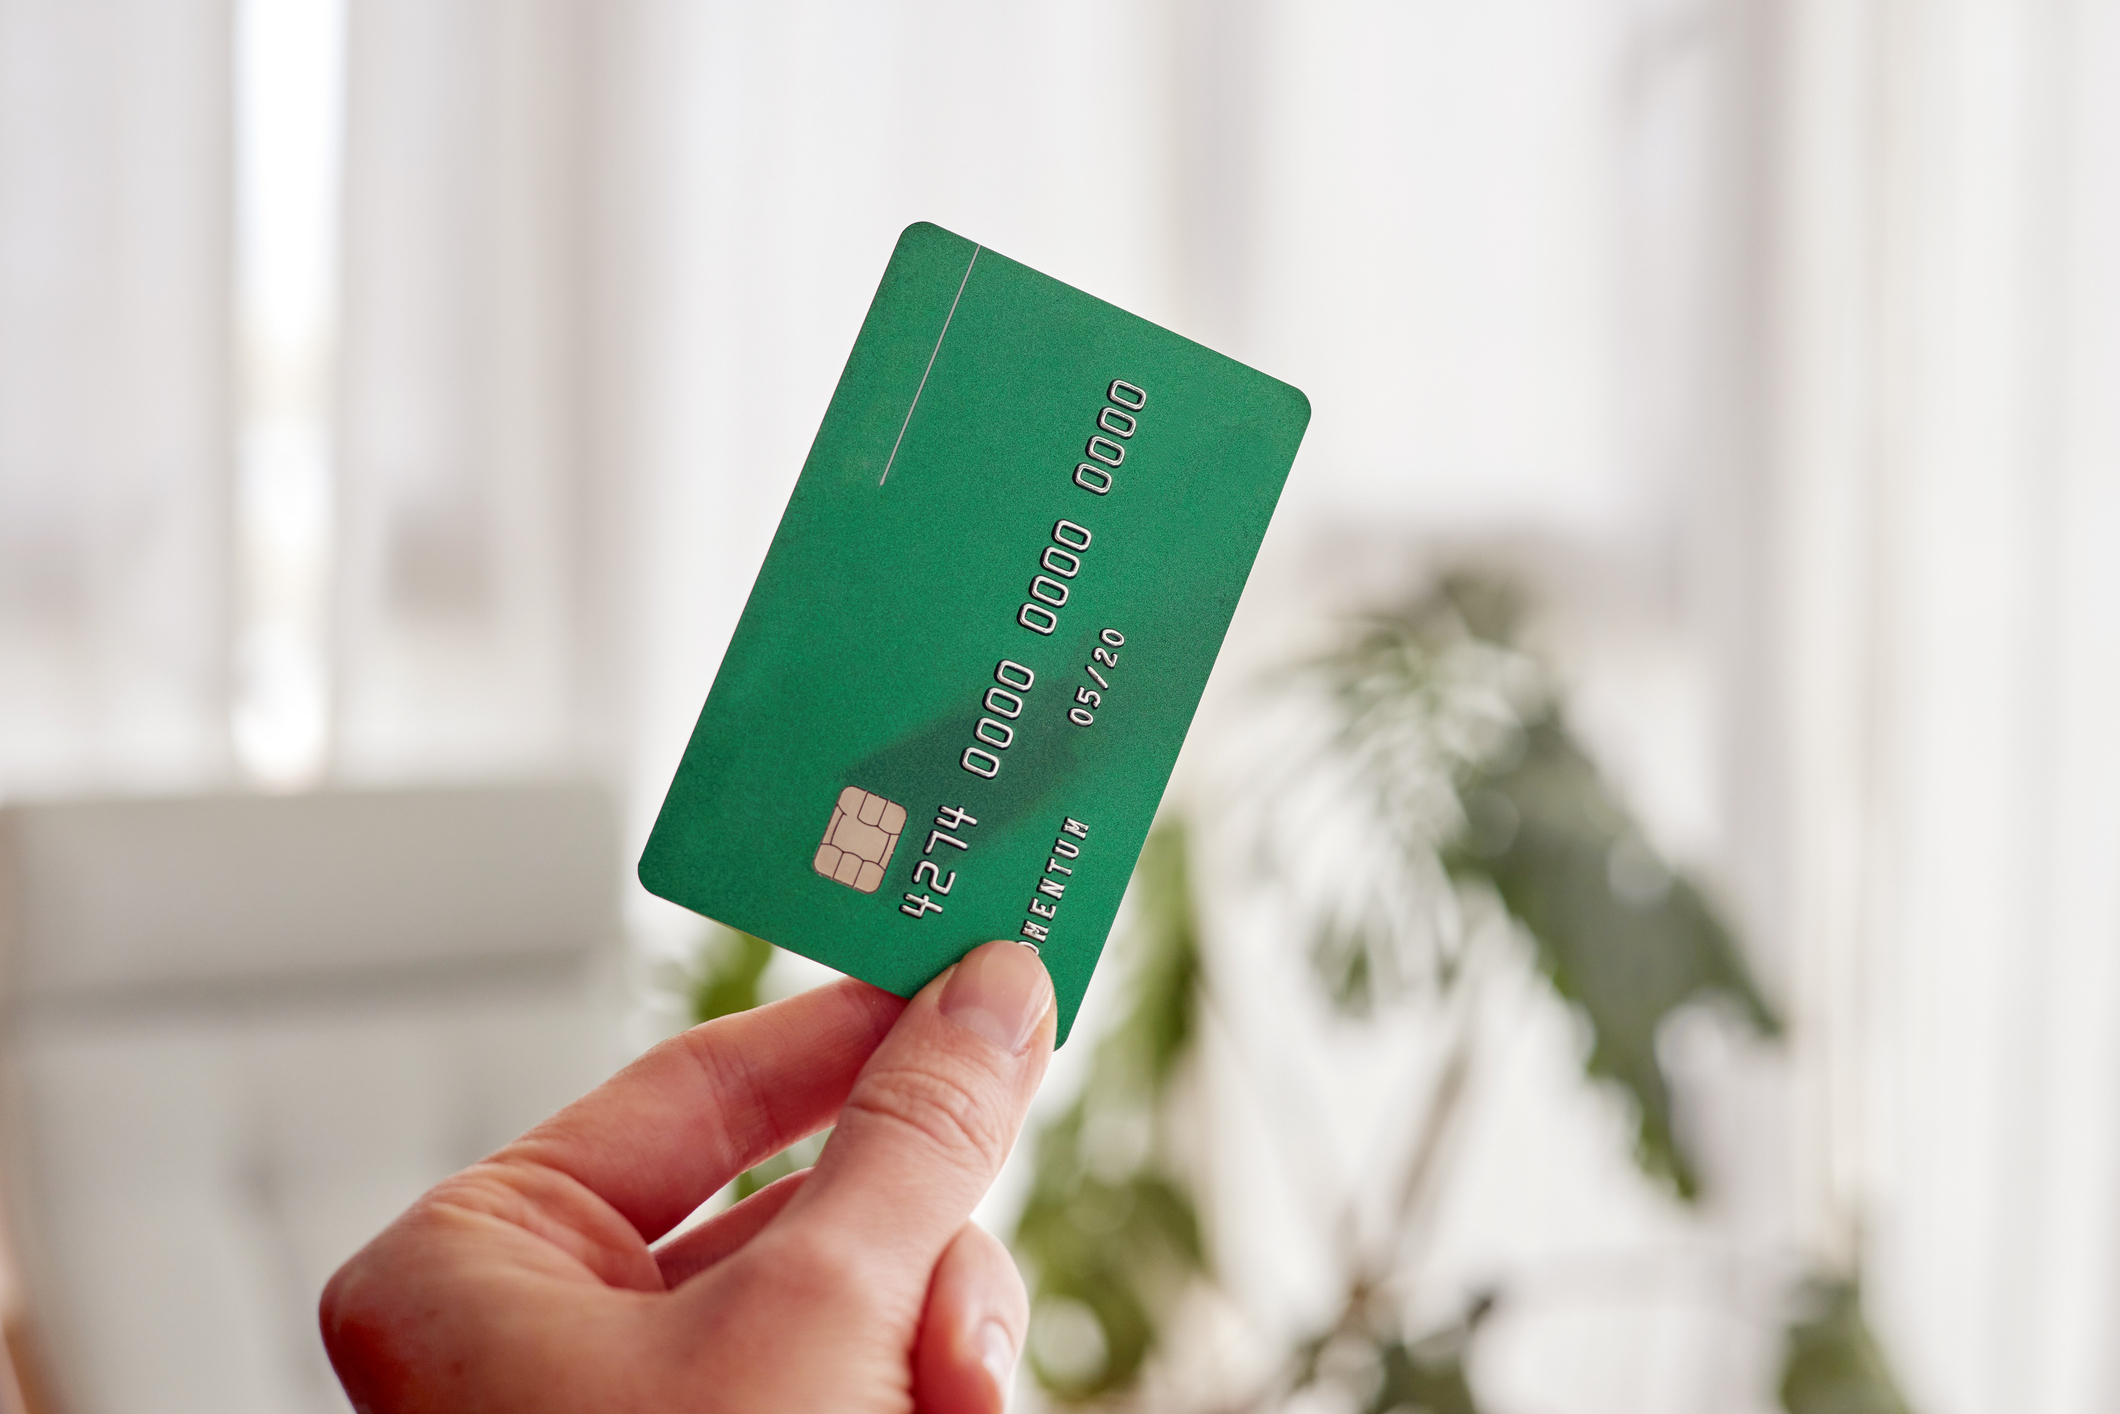 Hand holding a green bank card indoors, partial view of a window in the background